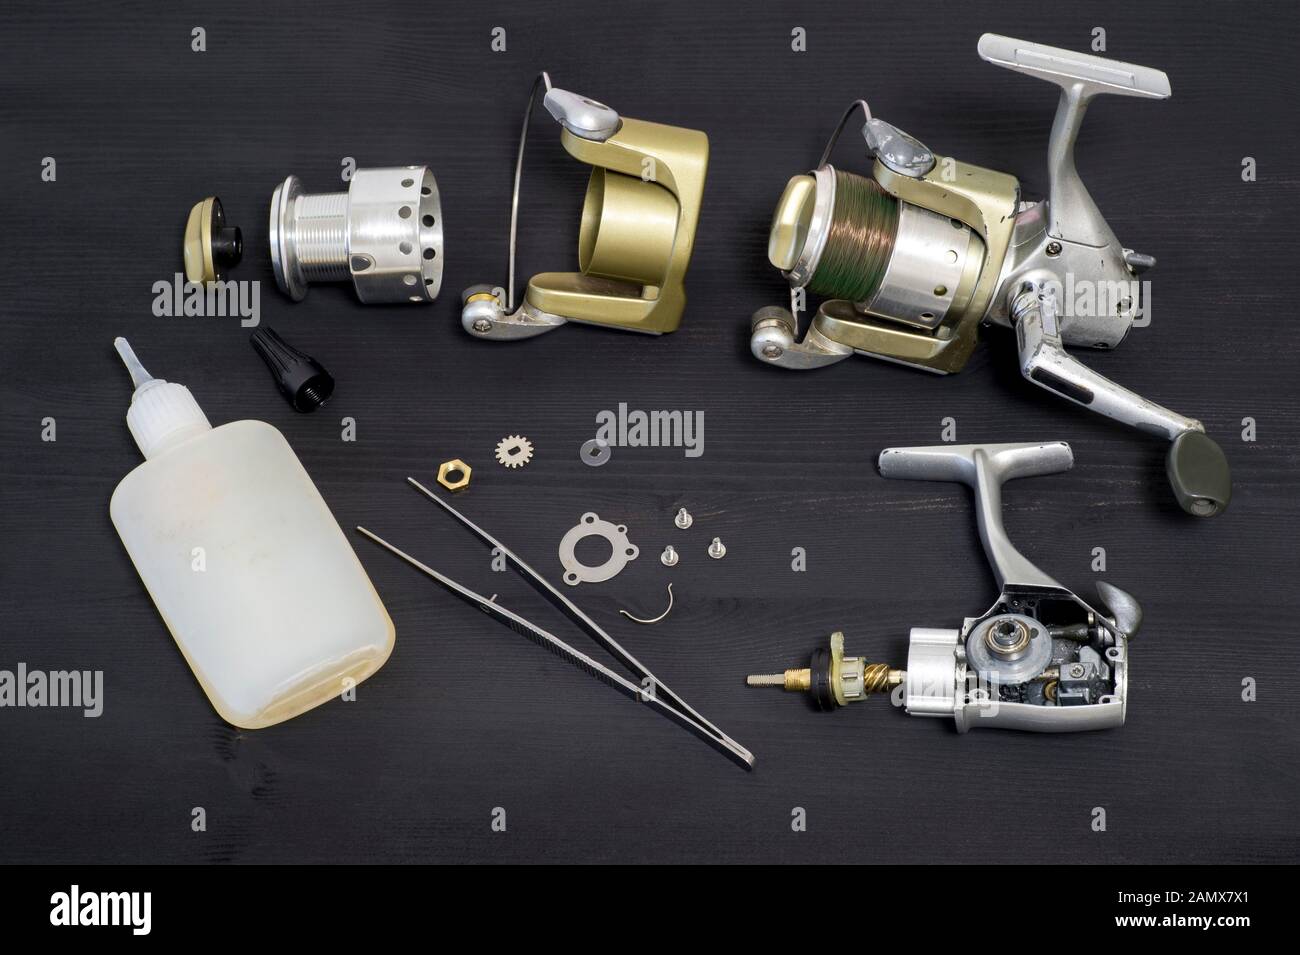 https://c8.alamy.com/comp/2AMX7X1/a-fishing-spinning-reel-as-a-whole-and-a-second-similar-completely-disassembled-the-main-parts-ready-for-lubrication-and-the-tweezers-in-the-foregrou-2AMX7X1.jpg